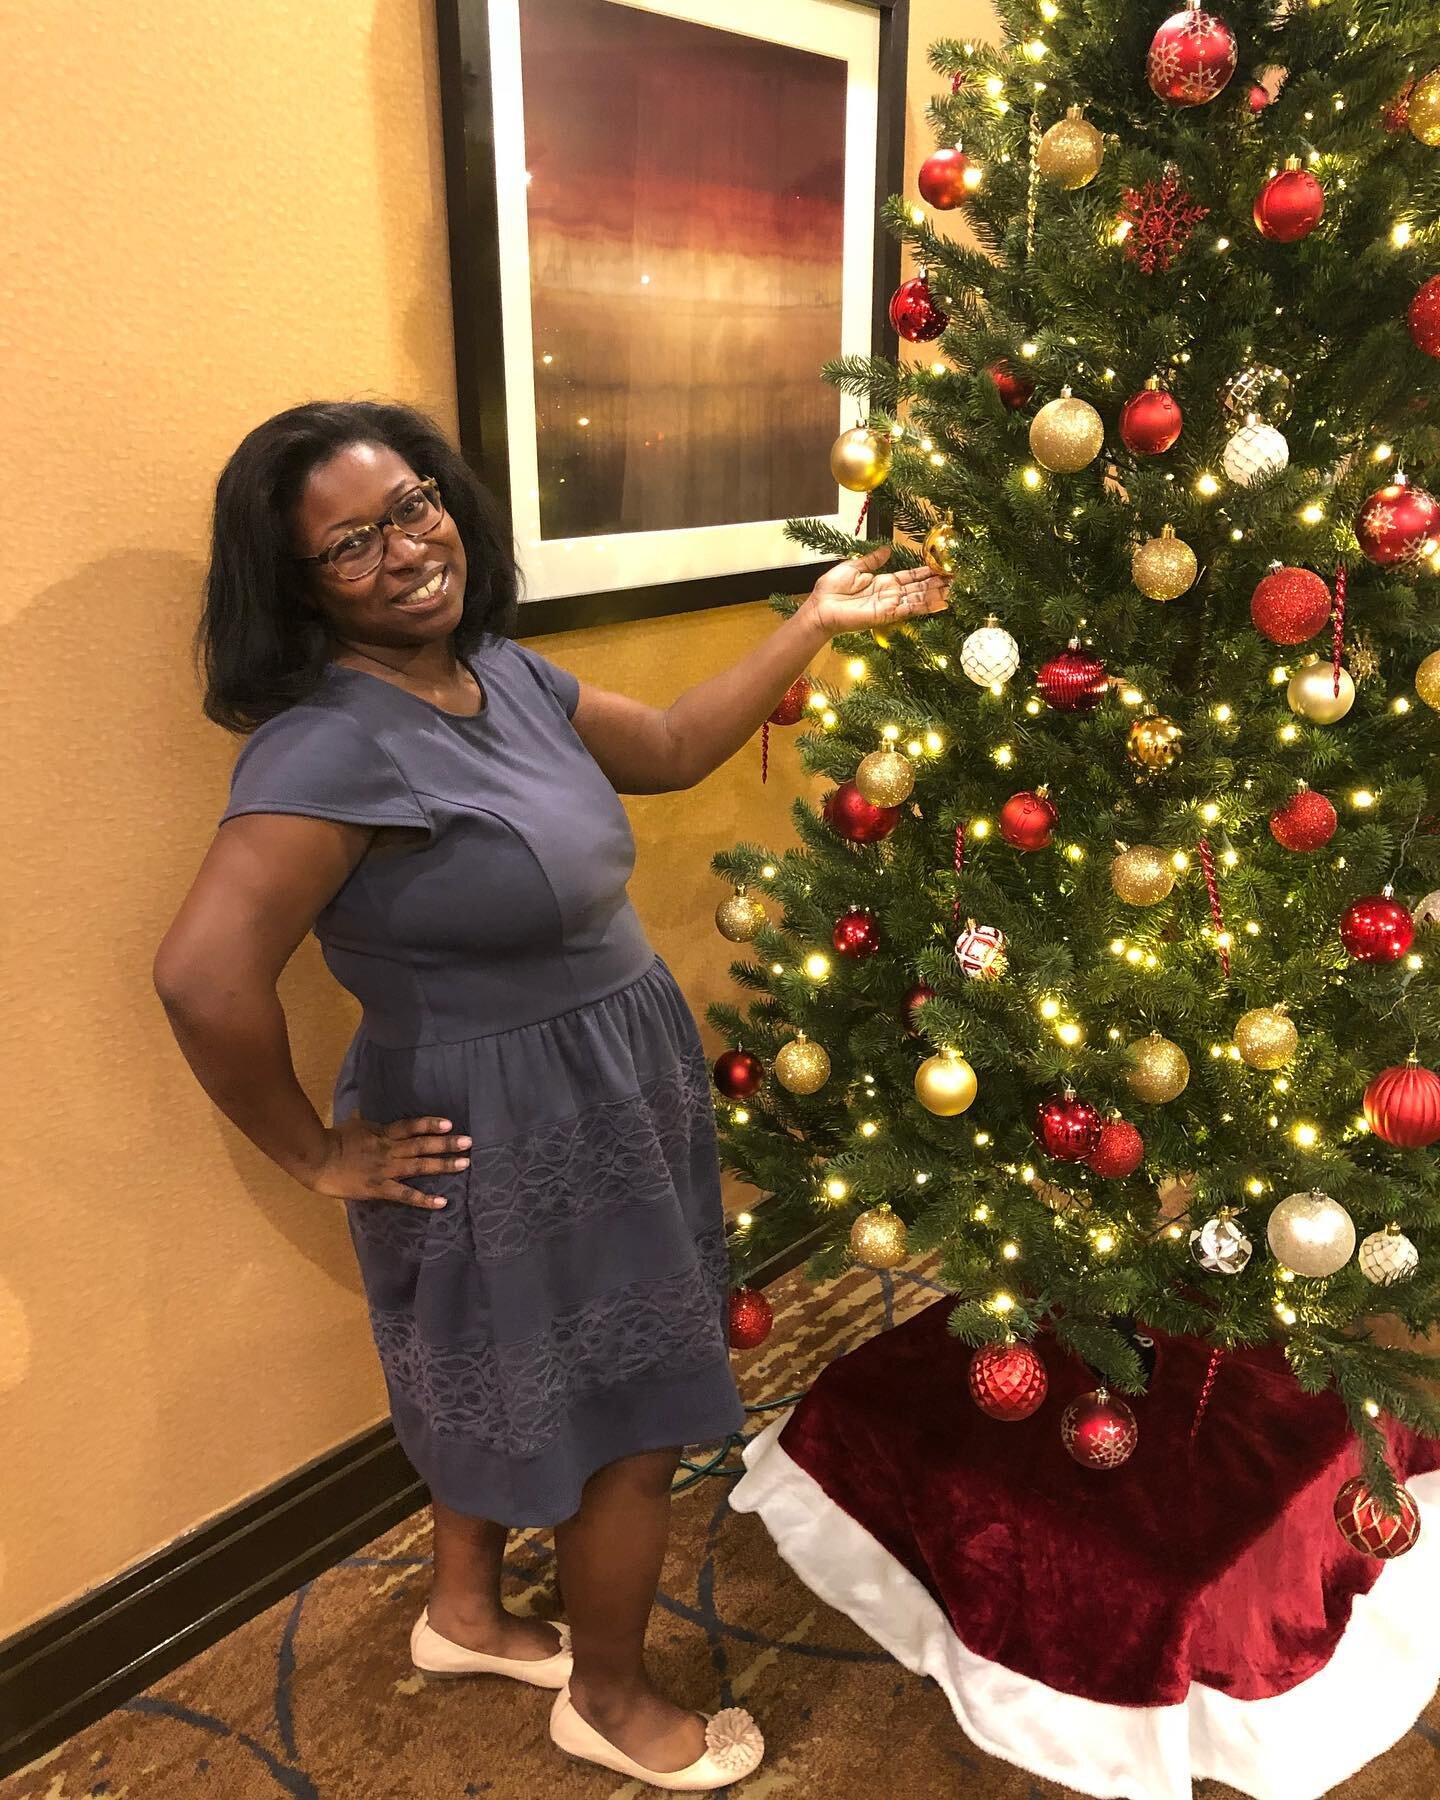 Let me tell you the story of the one year I did Christmas shopping without a plan. I spent double my budget from the previous year to ensure the tree was not bare like the tree pictured. Not because the gifts were more extravagant or had increased in